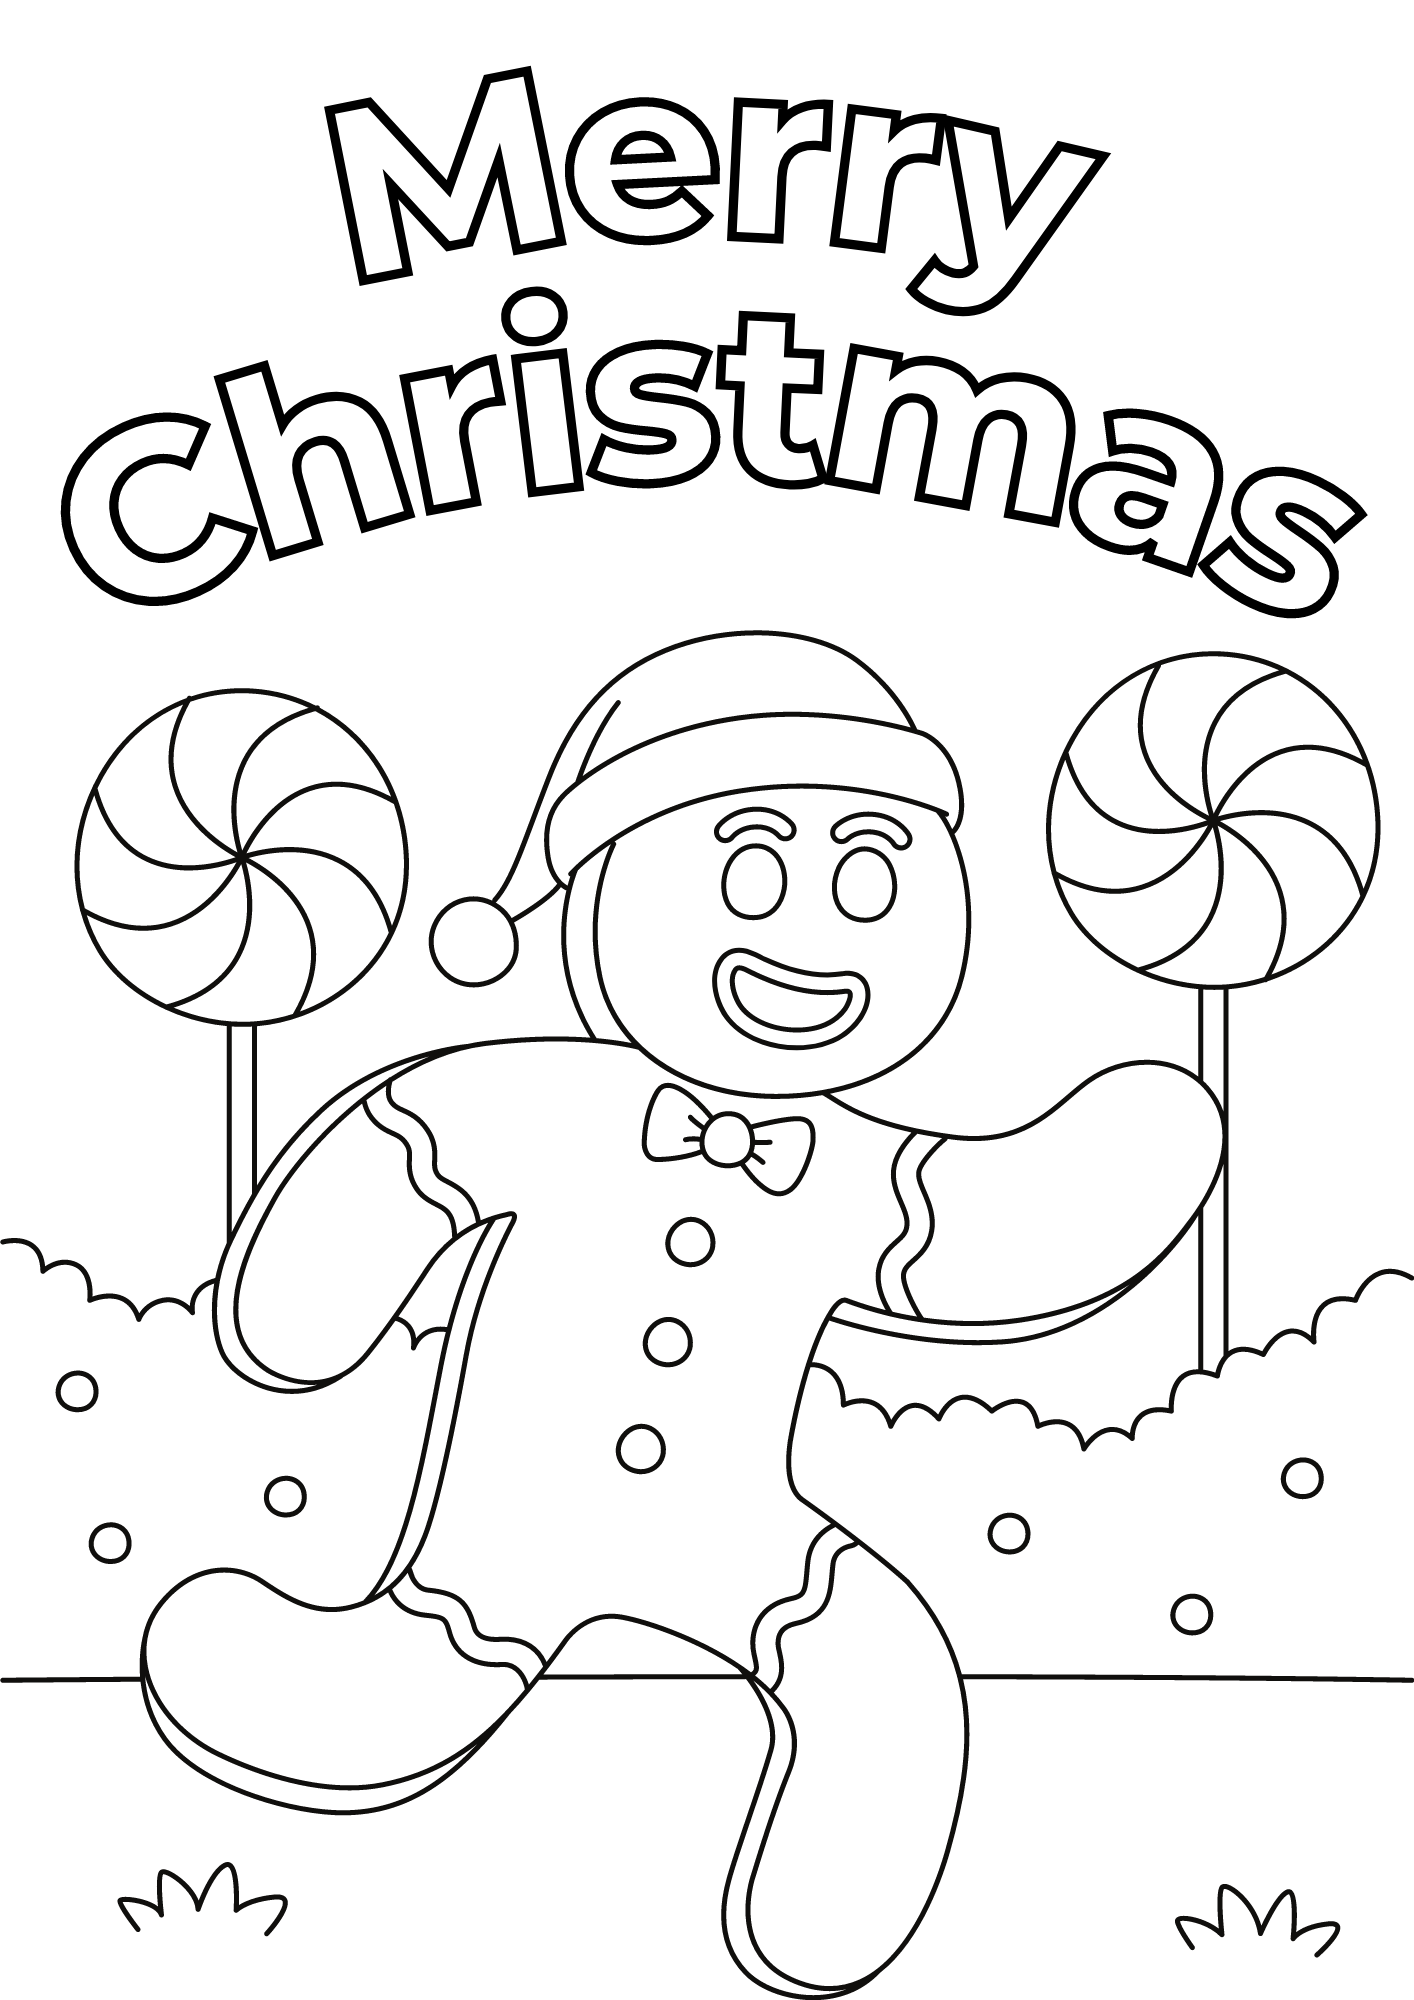 Keeley's Cause Merry Christmas Free Colouring Download